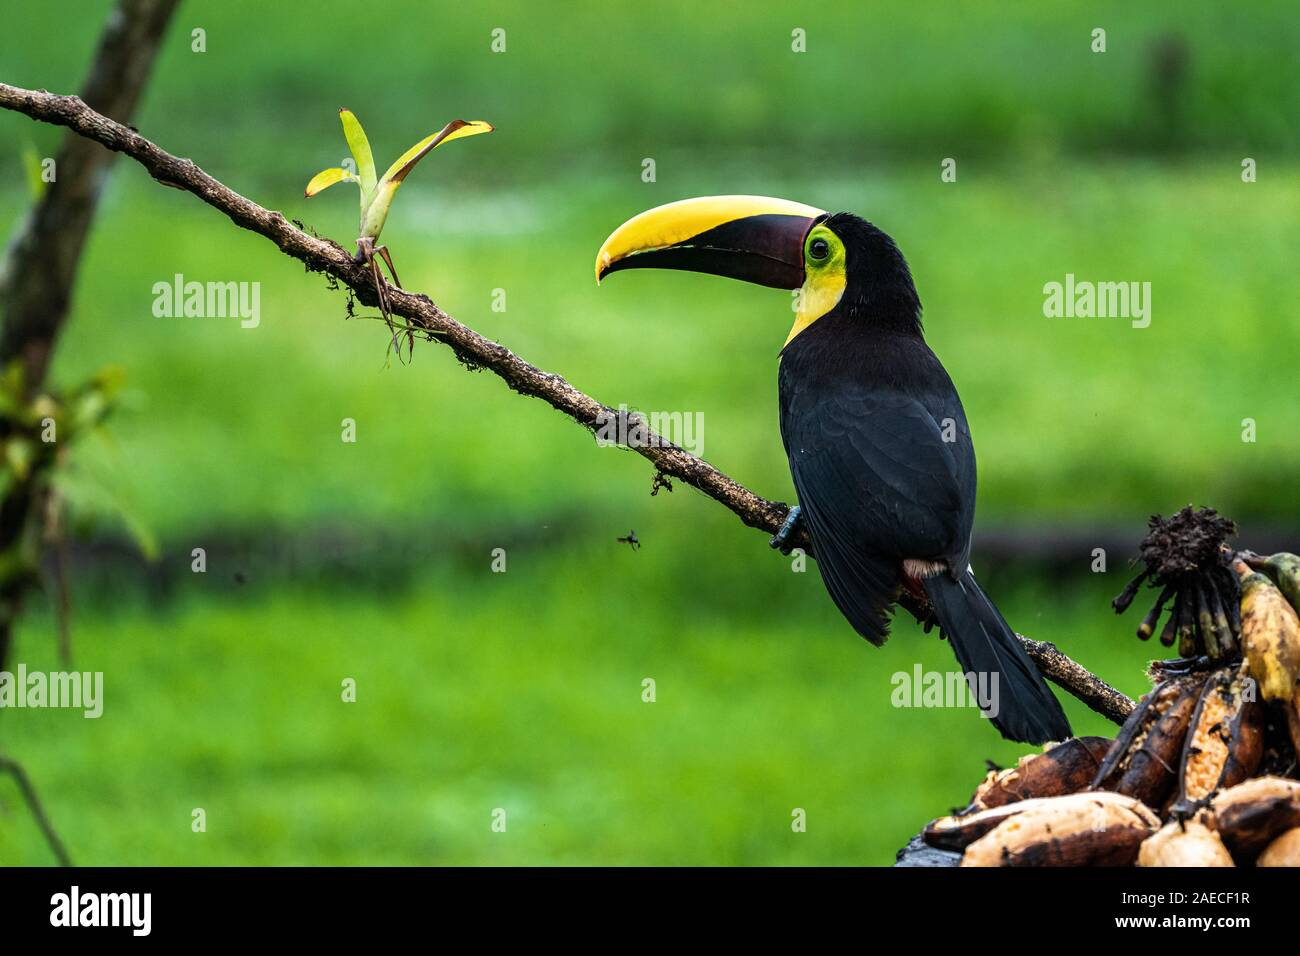 The chestnut-mandibled toucan or Swainson’s toucan (Ramphastos ambiguus swainsonii) in tropical rainforest. This bird is a subspecies of the yellow-th Stock Photo